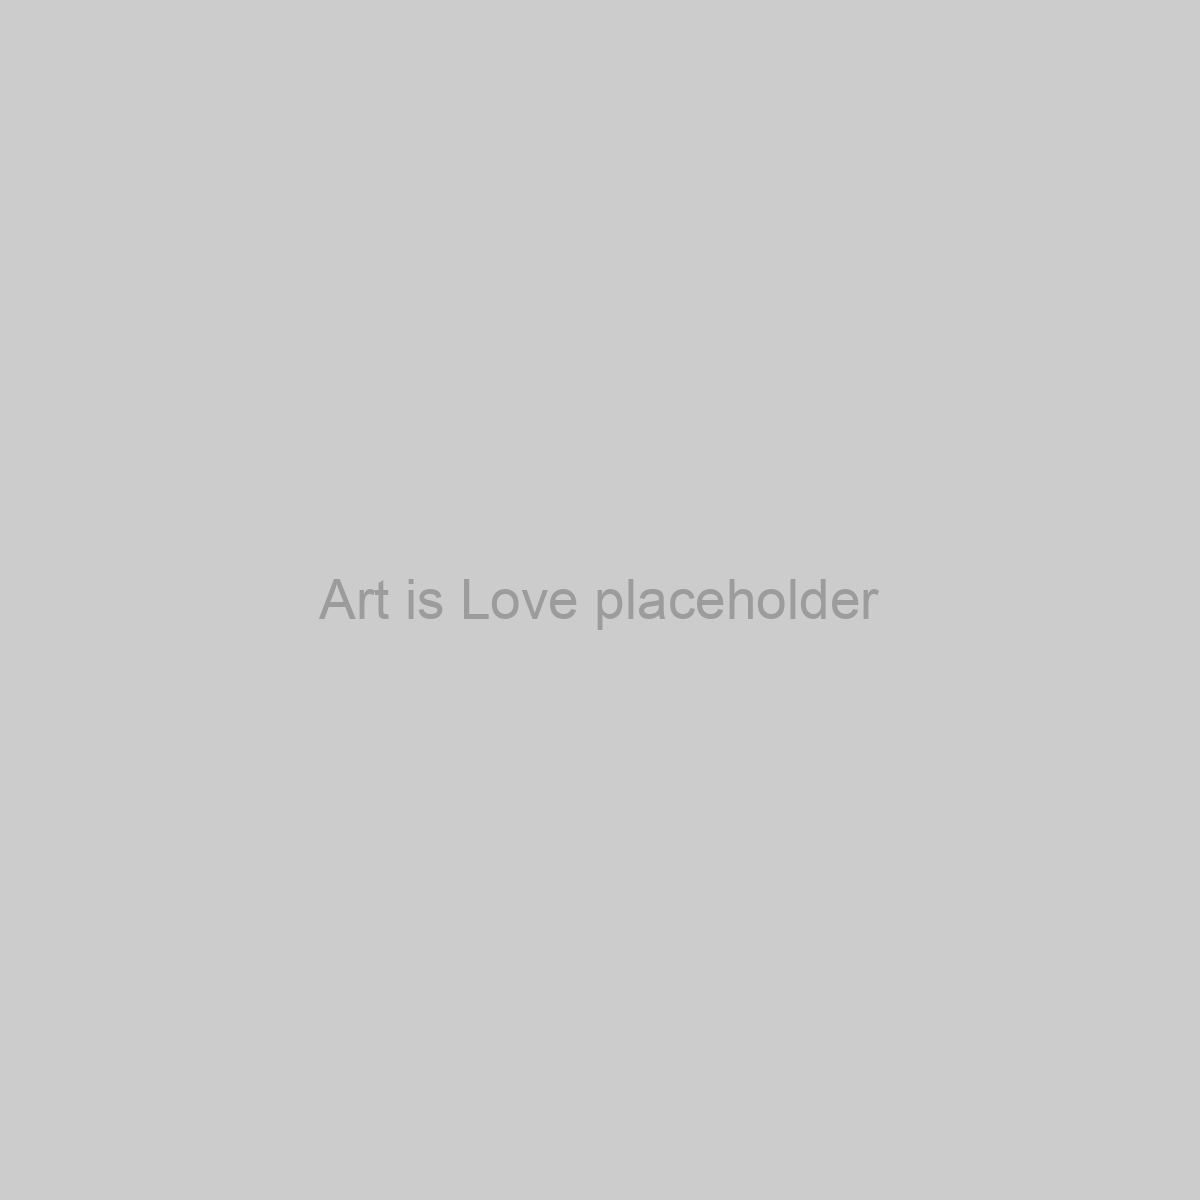 Art is Love Placeholder Image